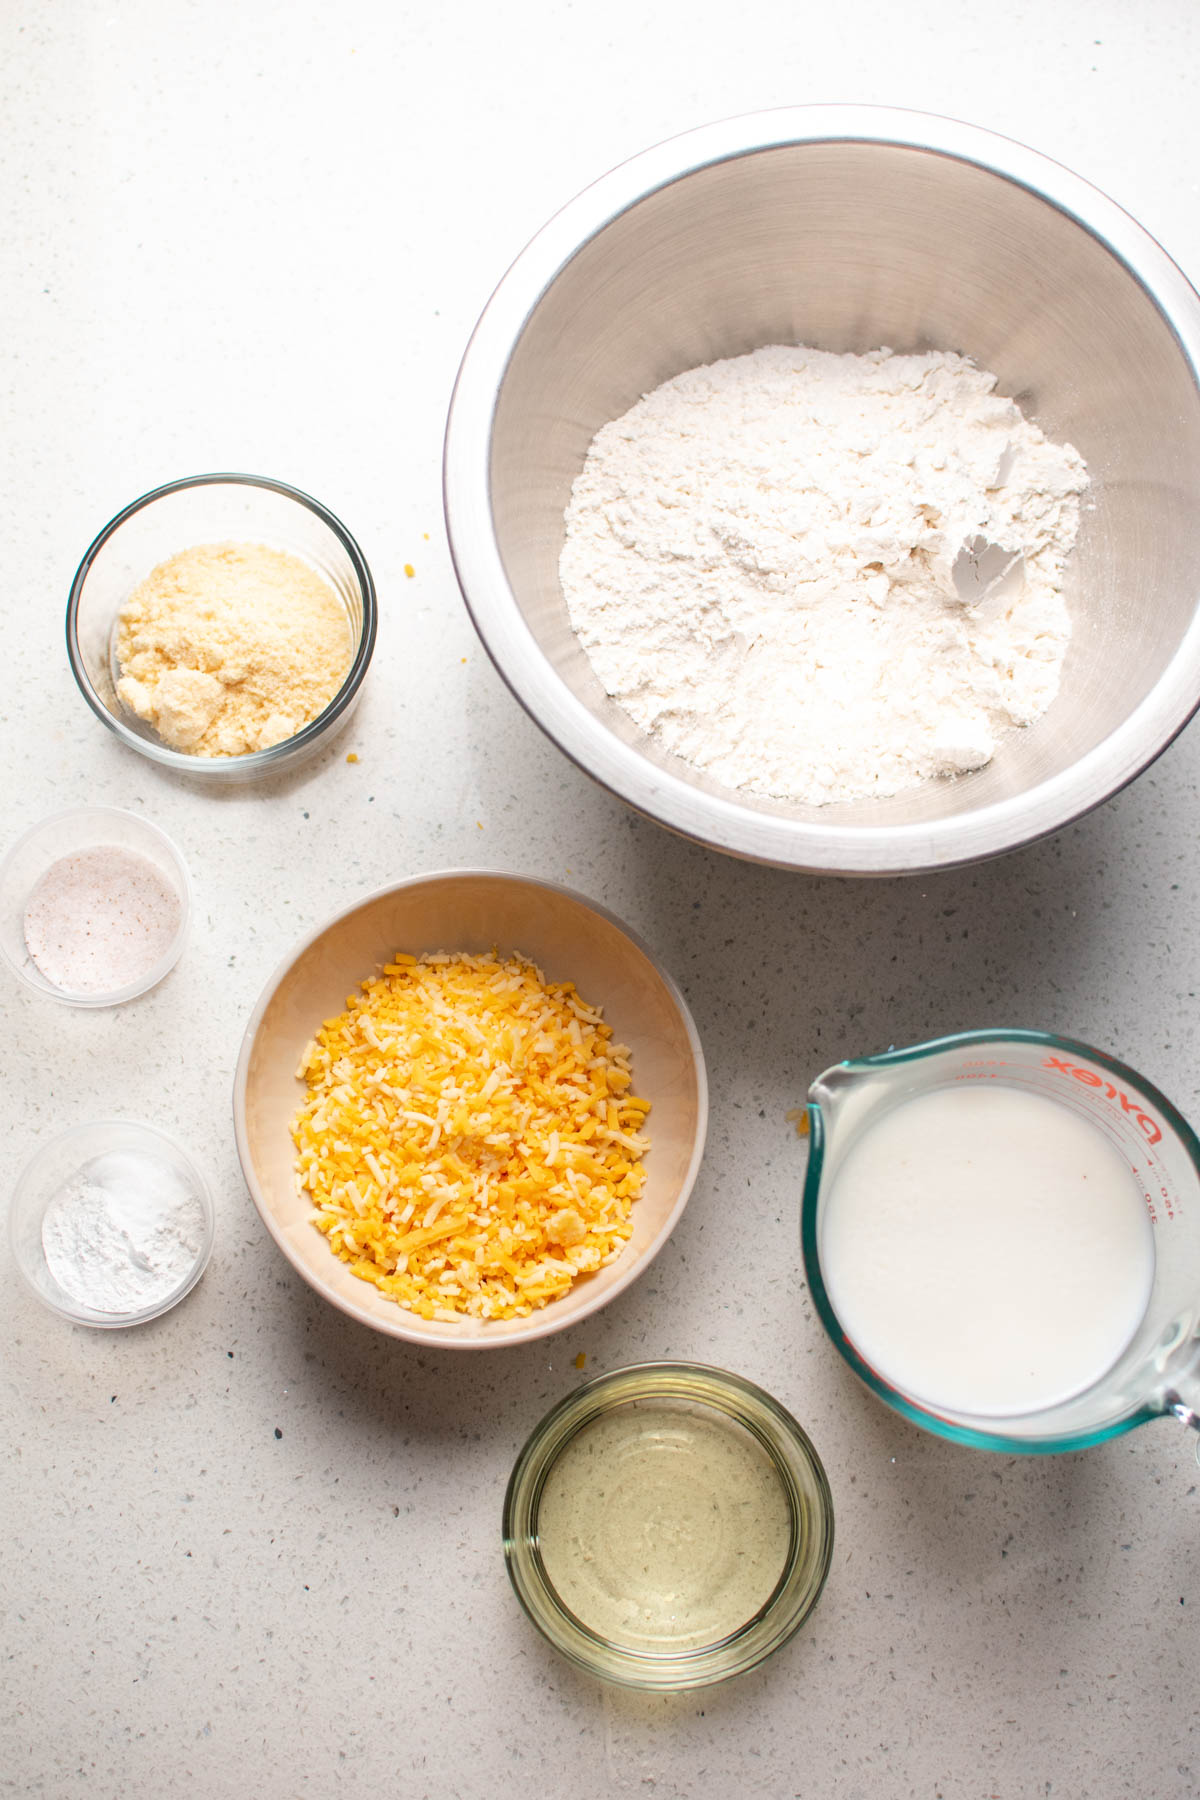 Bowls of ingredients for parmesan drop biscuits including flour, cheese, and milk.